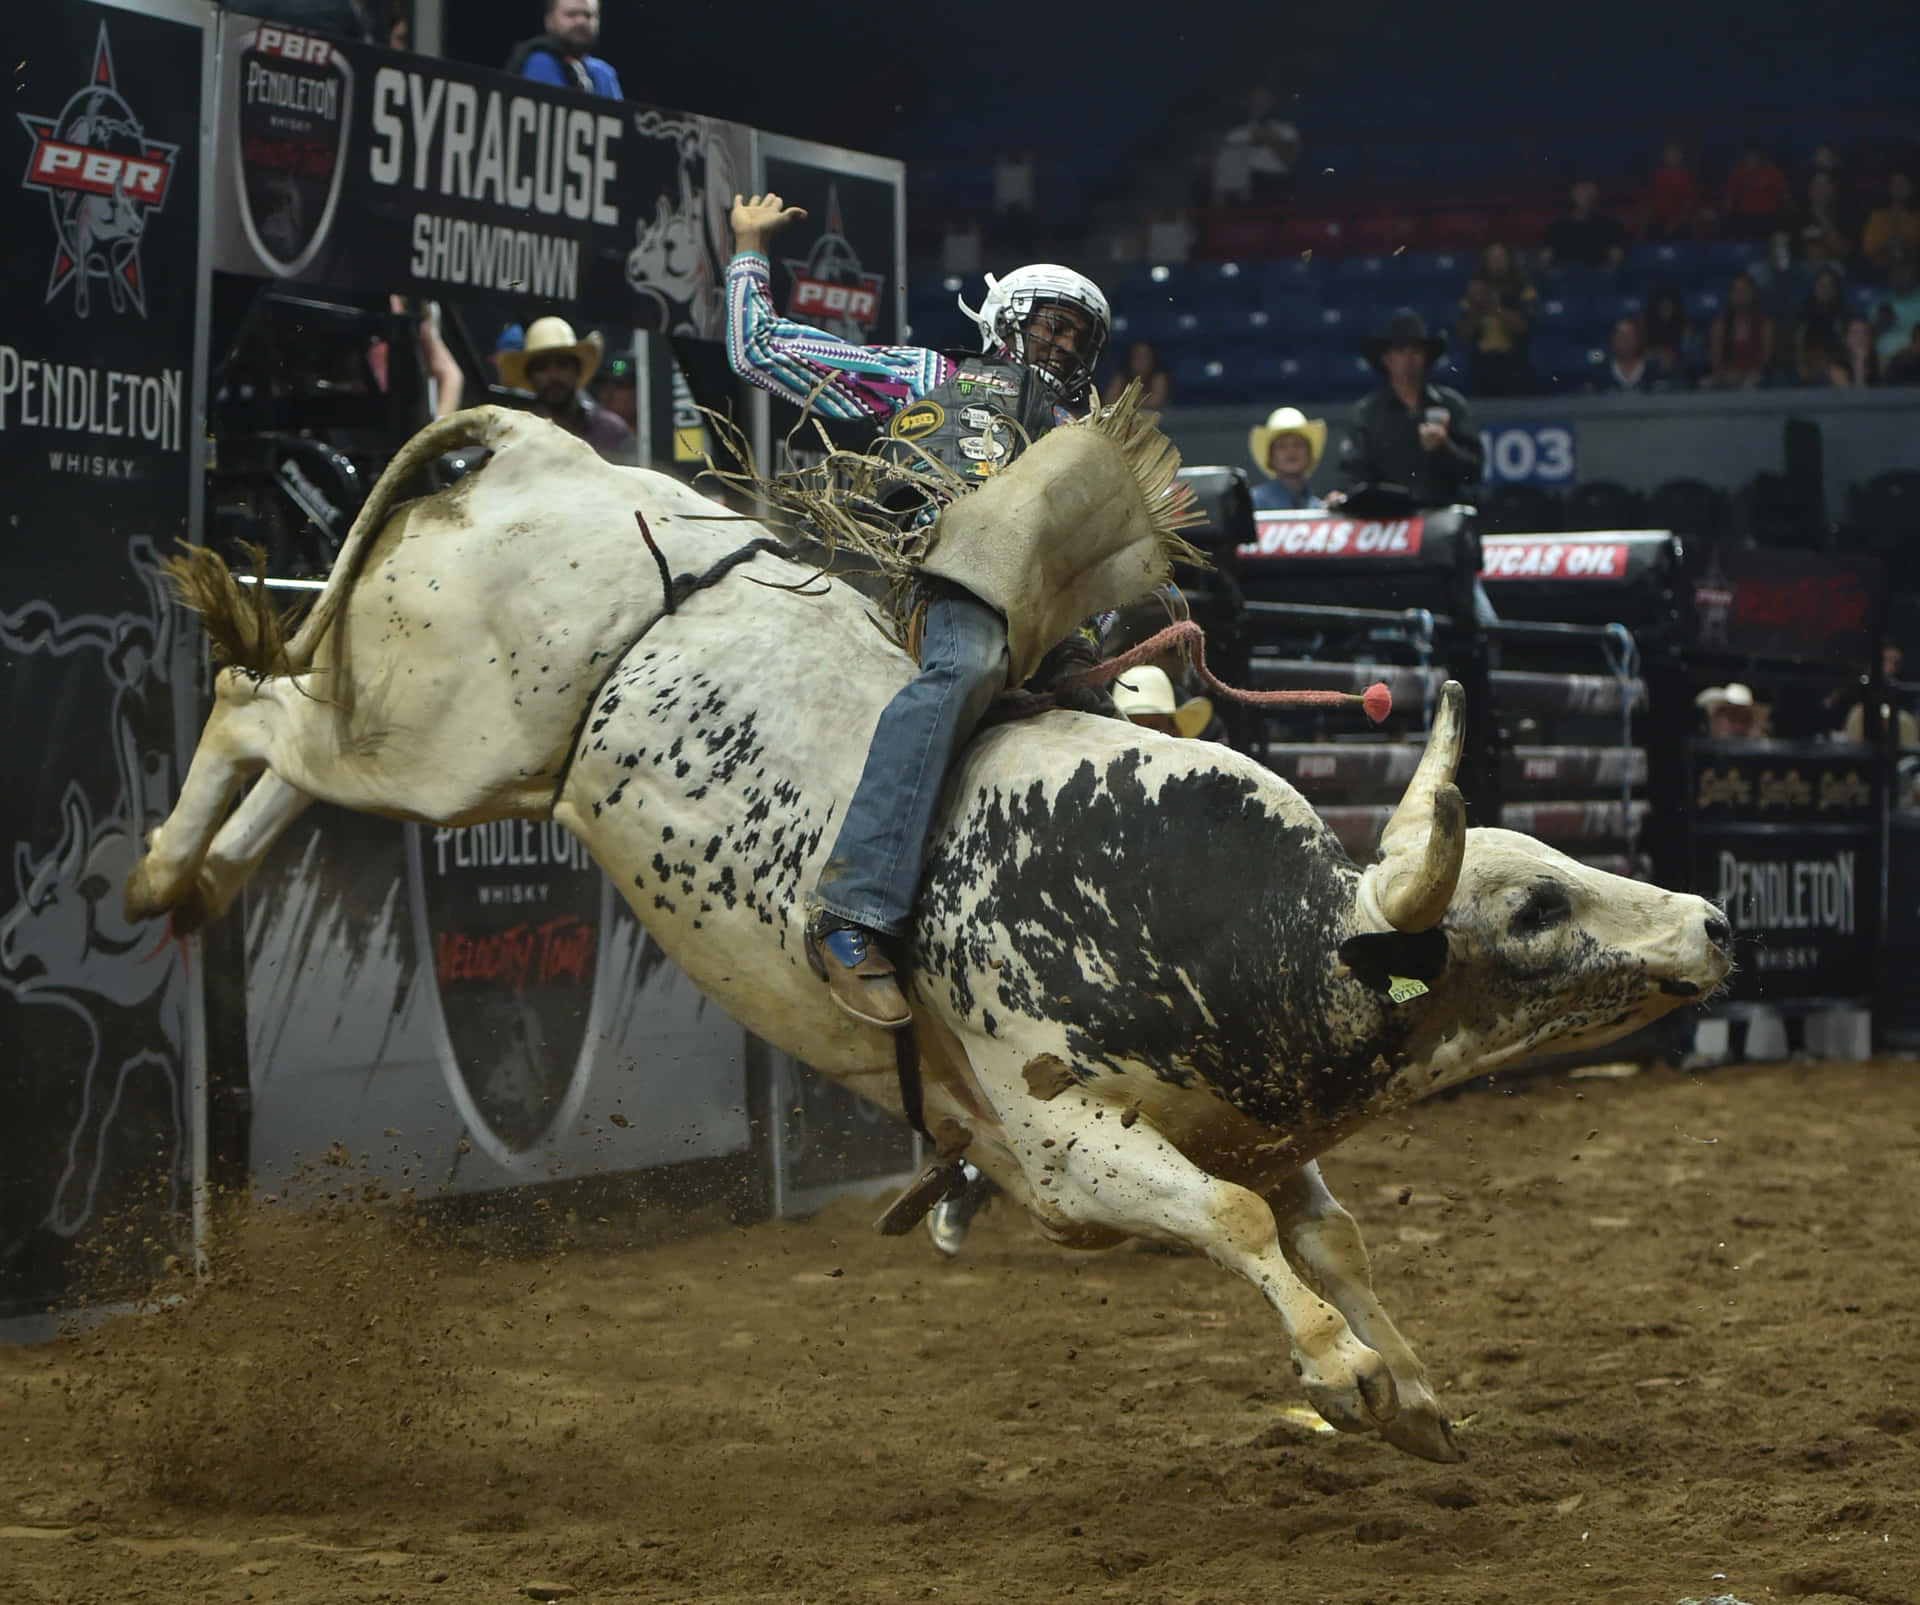 A Professional Bull Rider competes against the beast